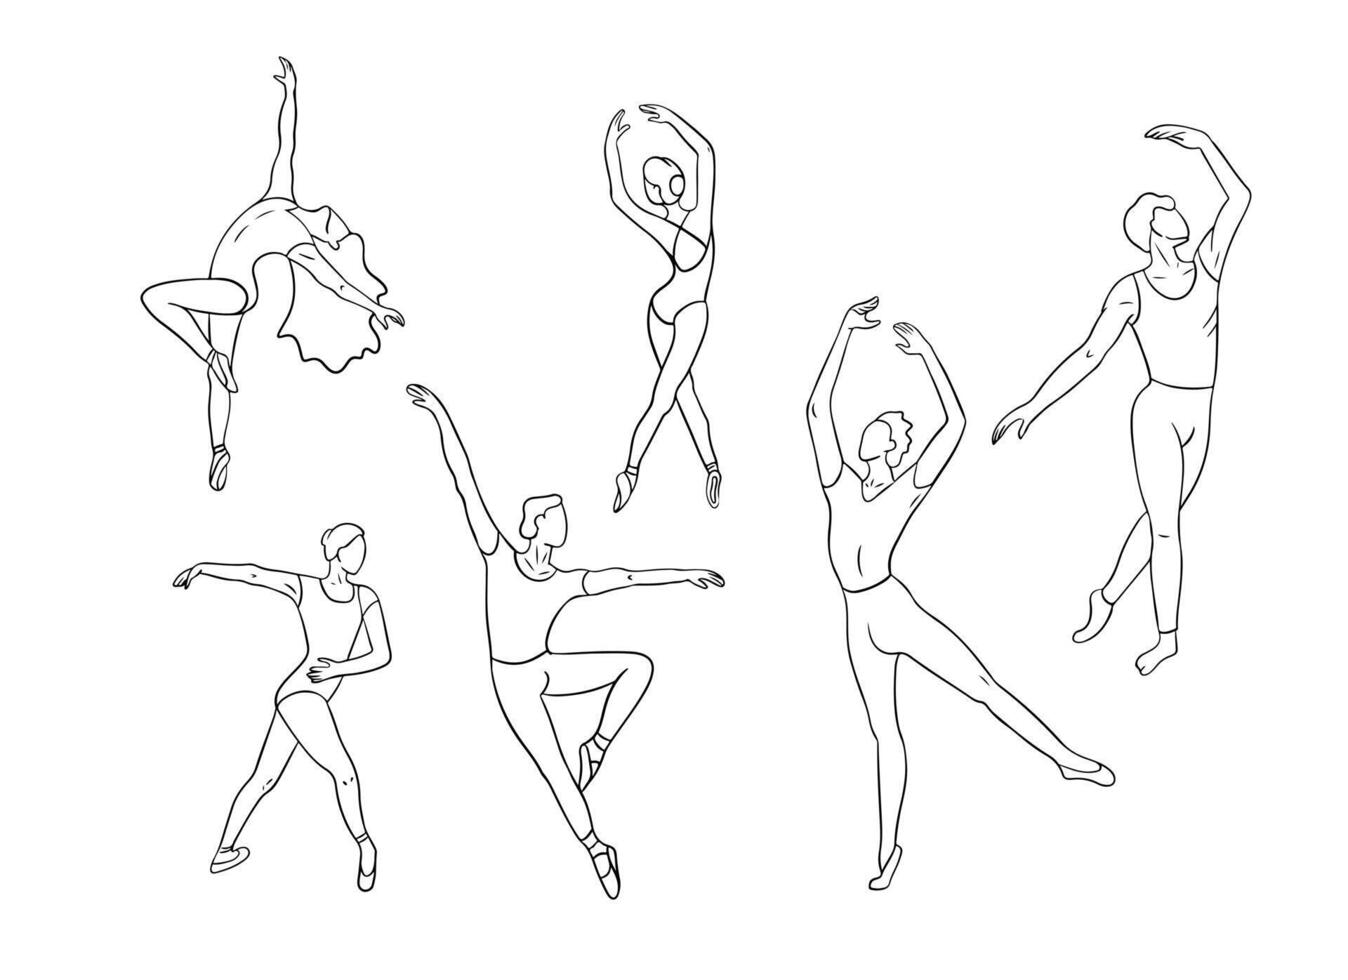 Hand drawn sketch outline set with dancing people. Black contour collection of women and men dancing classic dances, ballet. Sketch isolated drawings on white background for coloring pages, tattoo vector